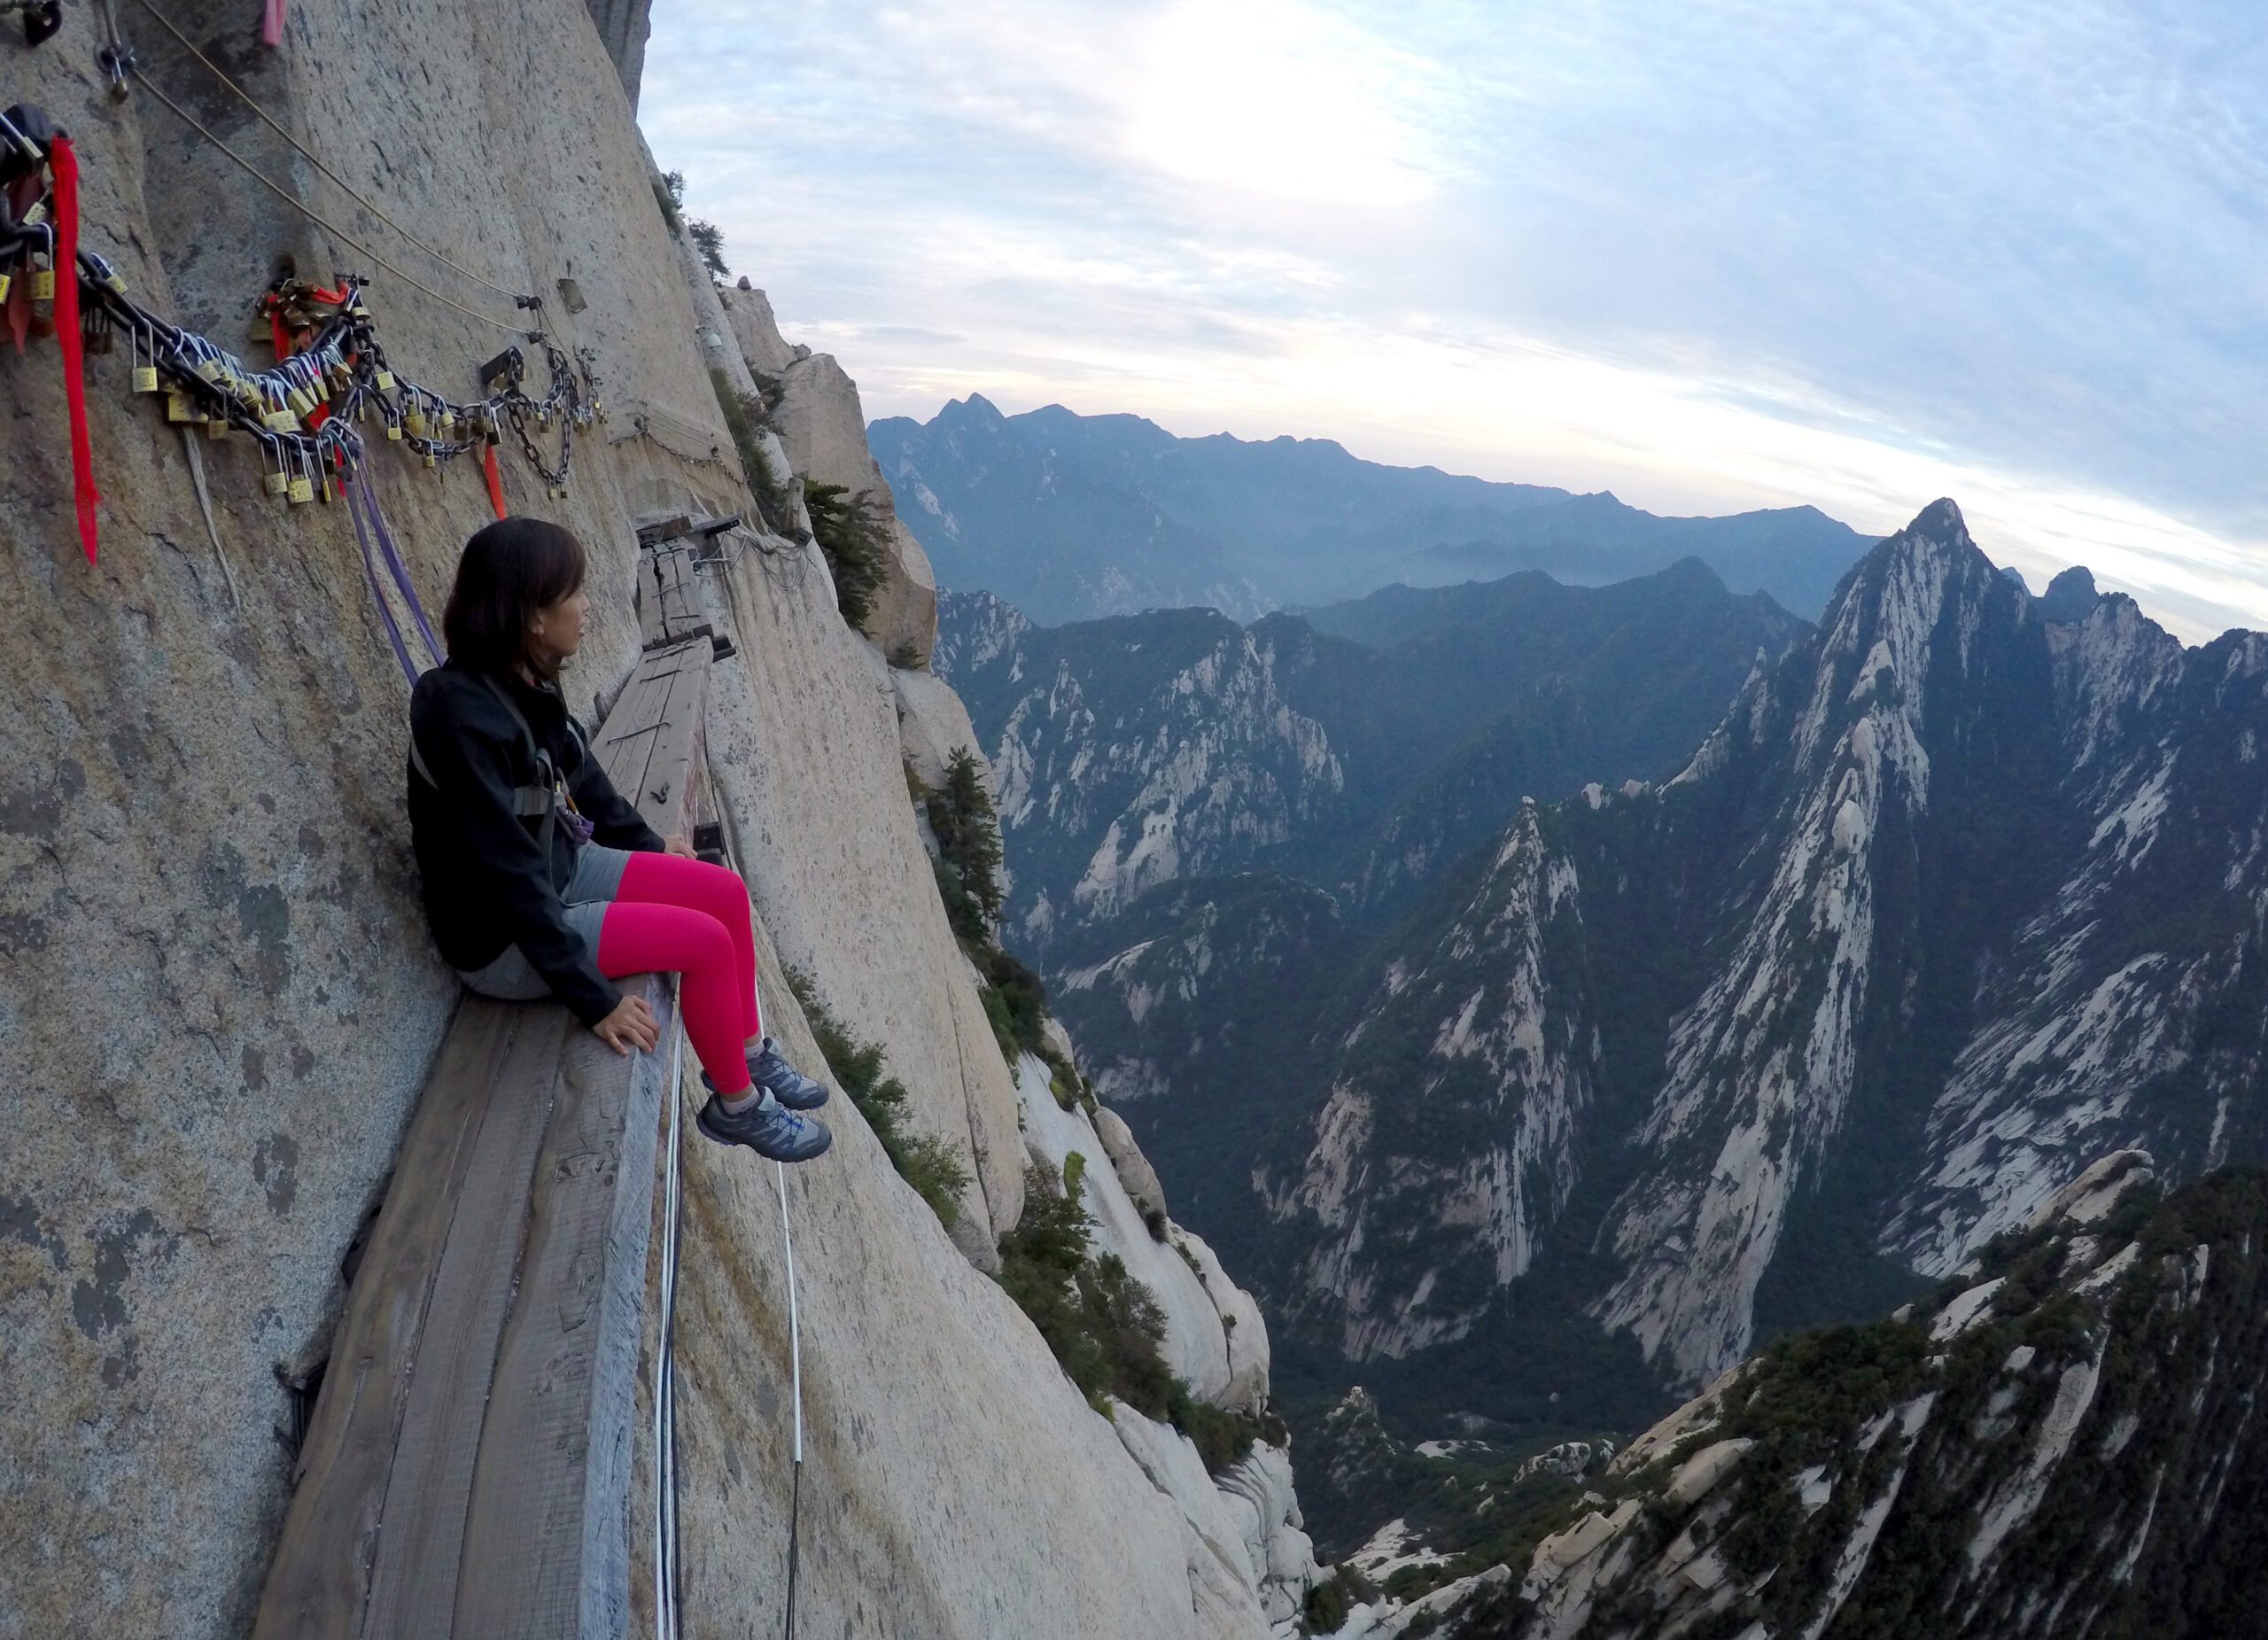 Hiking the ‘Plank Road in the Sky’ of Mount Hua, one of ‘world’s most dangerous trails’